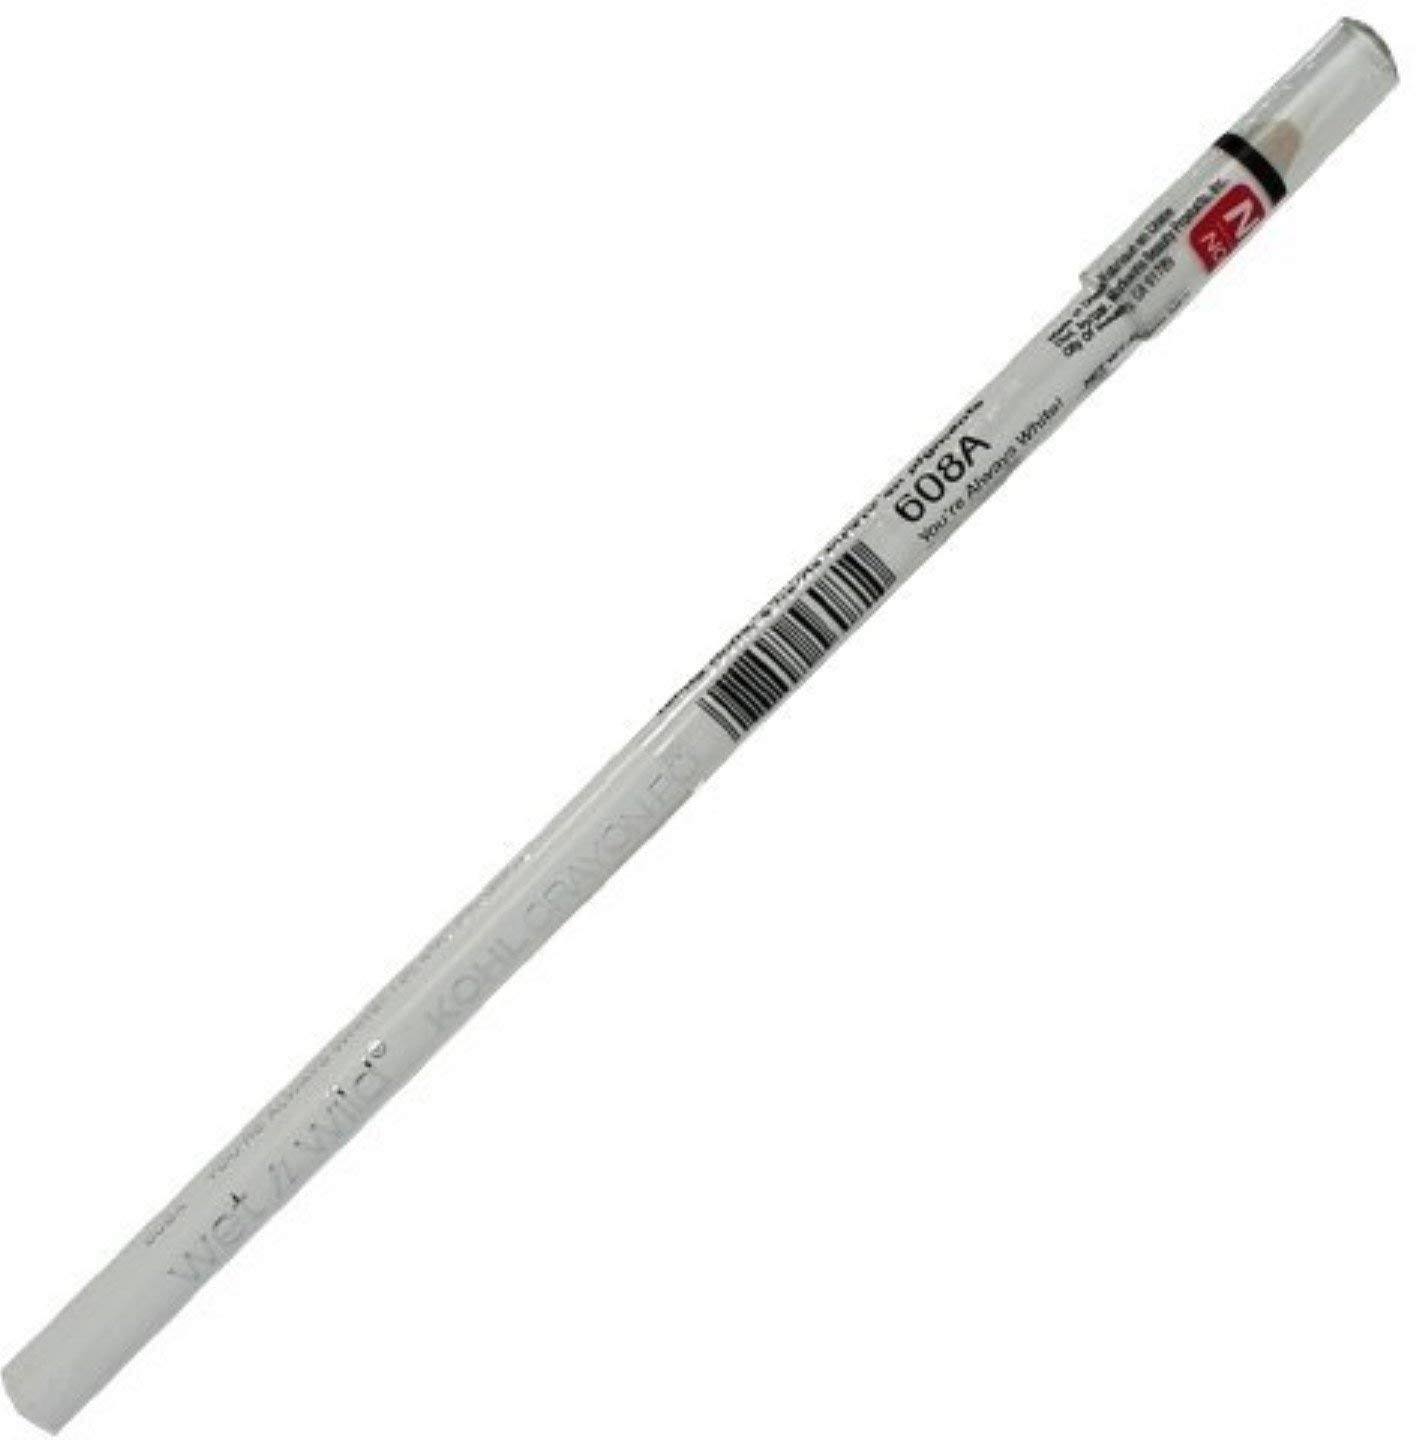 Wet N Wild Color Icon Kohl Liner Pencil - You're Always White